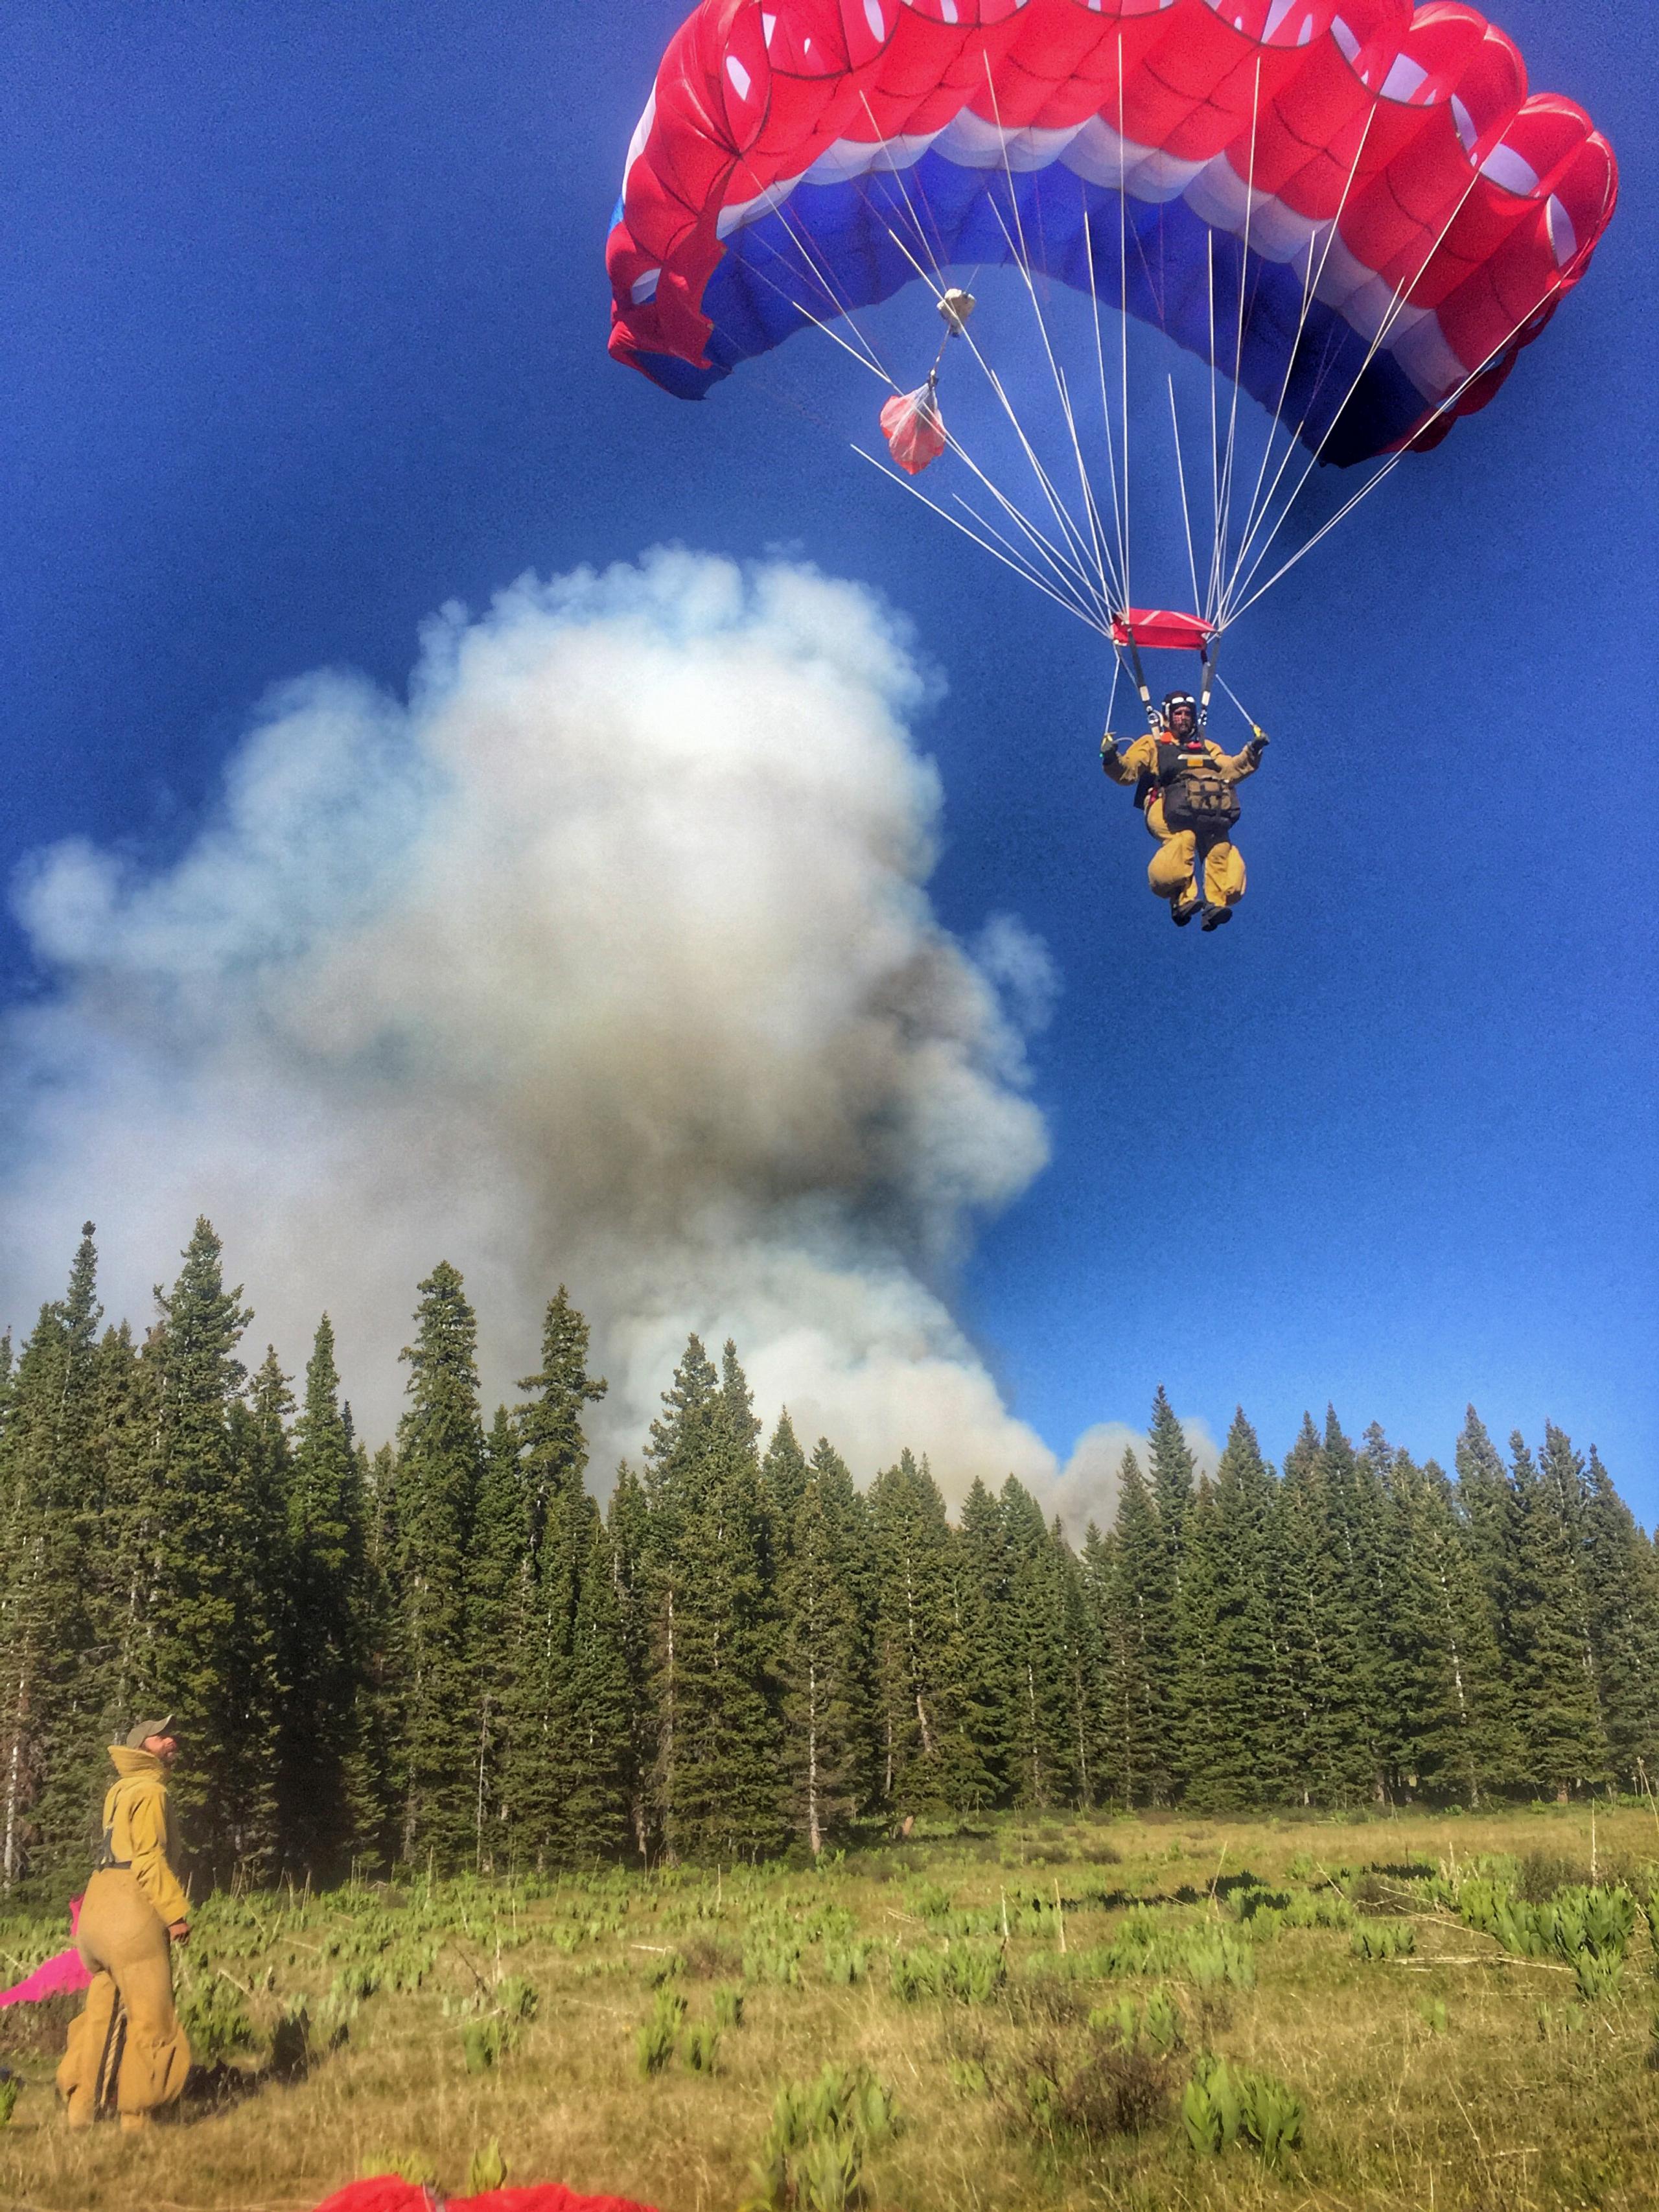 Smokejumper parachuting into a field with giant plume of smoke in the background